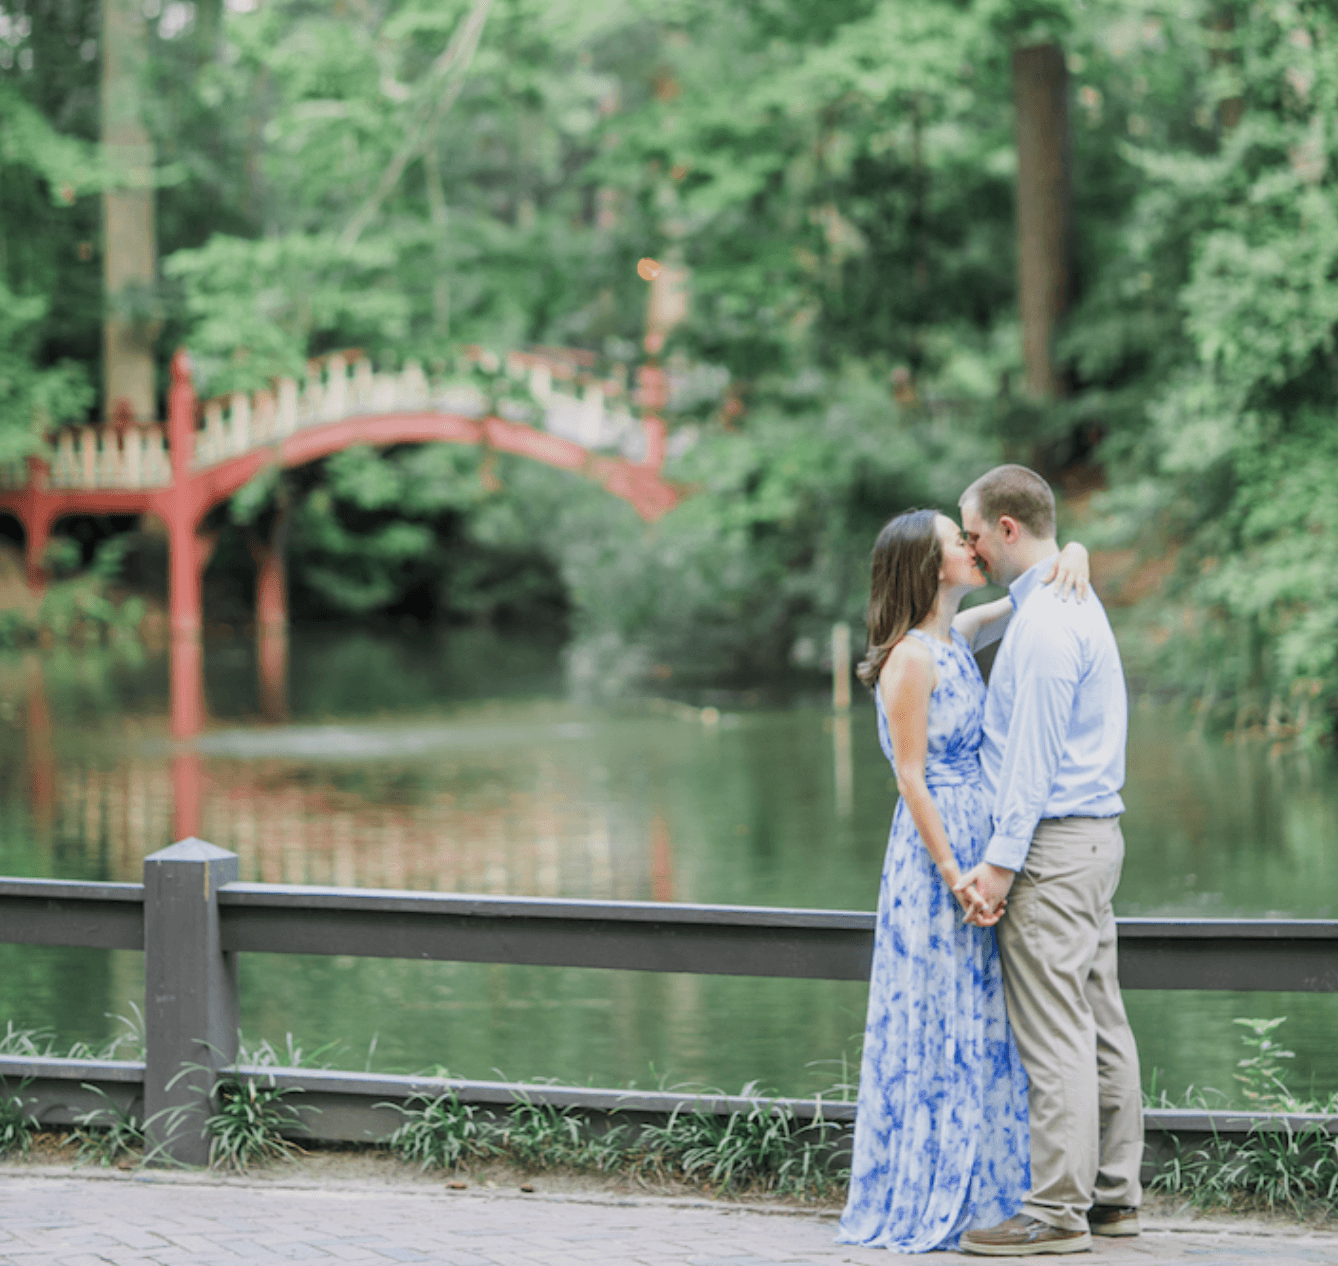 William and Mary Crim Dell Bridge, romantic romance in Williamsburg Virginia for Valentine's Day, Weddings, Date Night, and engagement